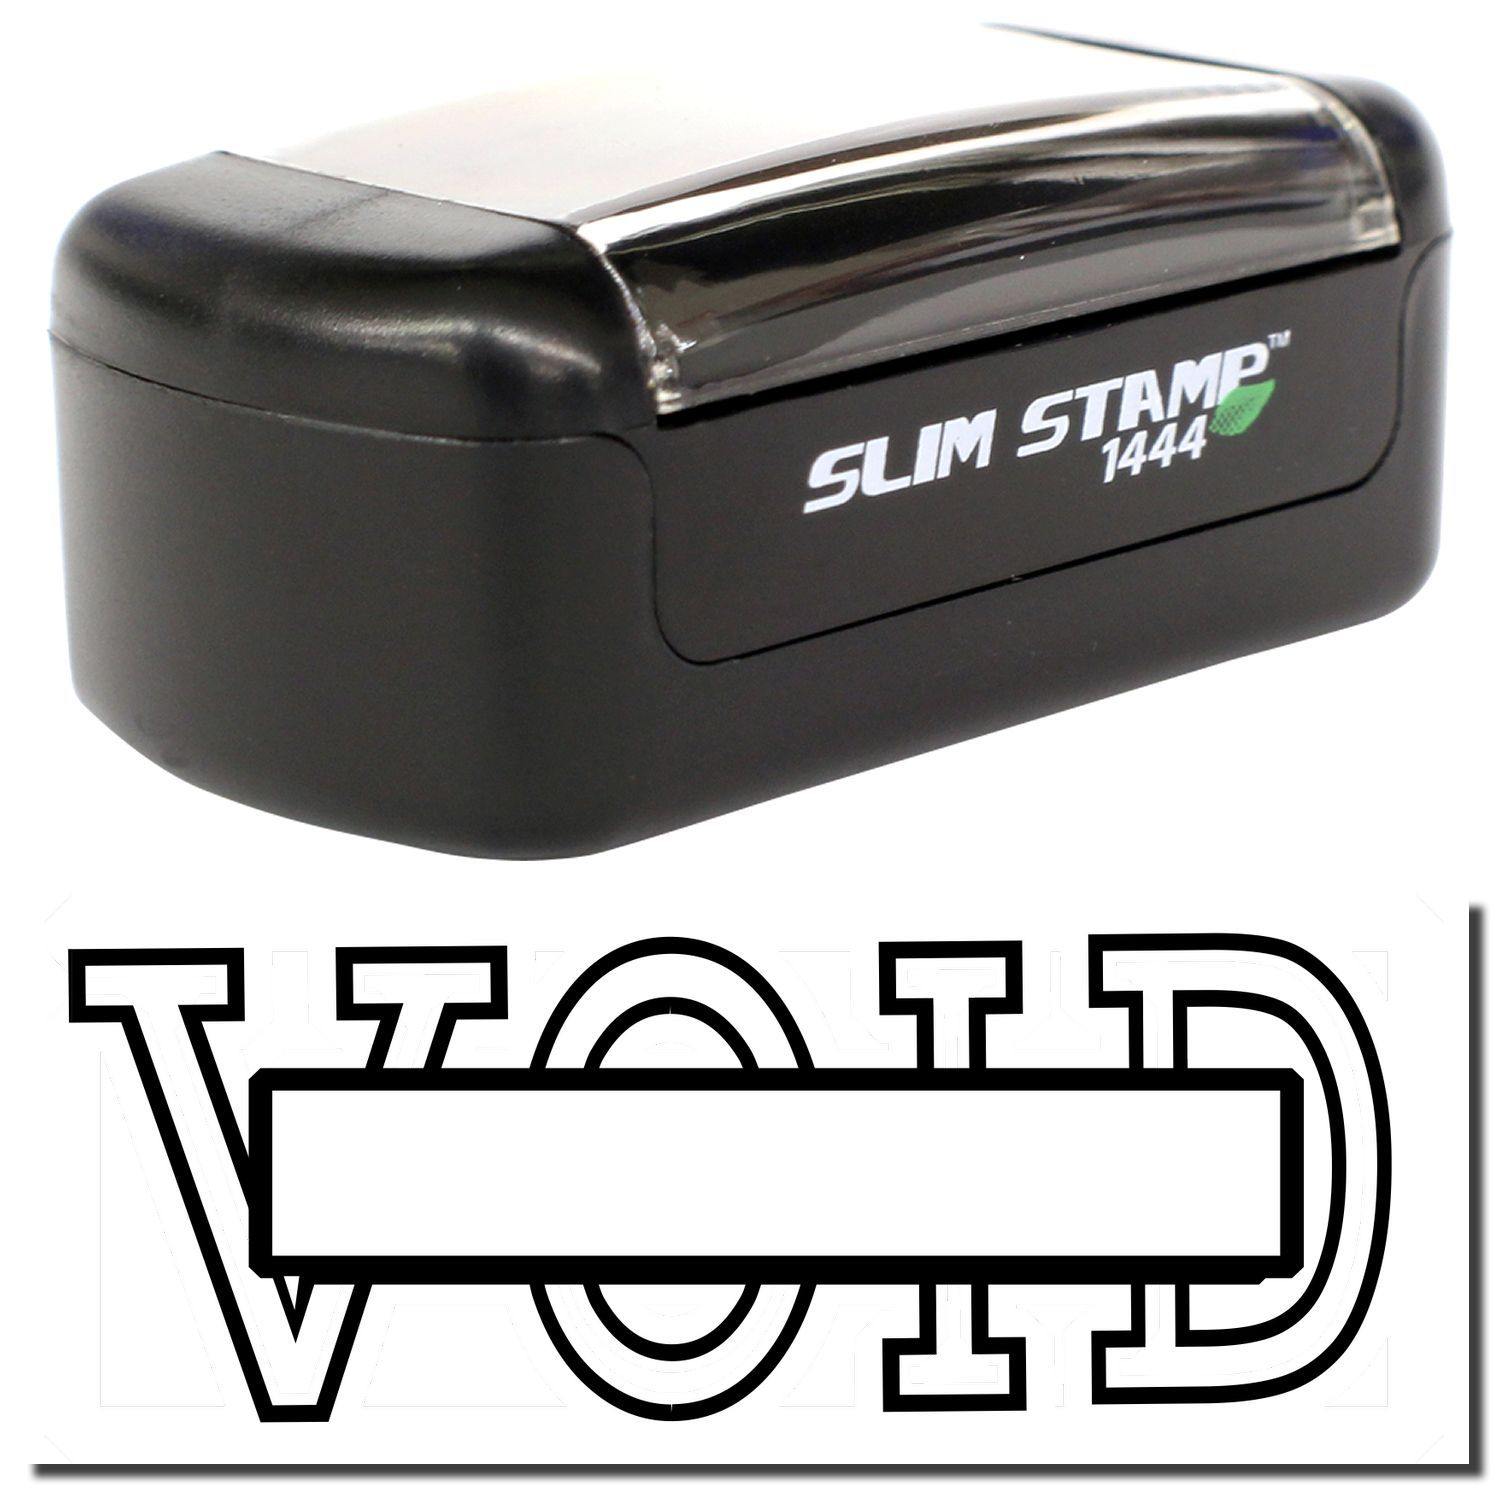 A slim pre-inked stamp with a stamped image showing how the text "VOID" in a large outline font with the box in the center of the text is displayed after stamping.